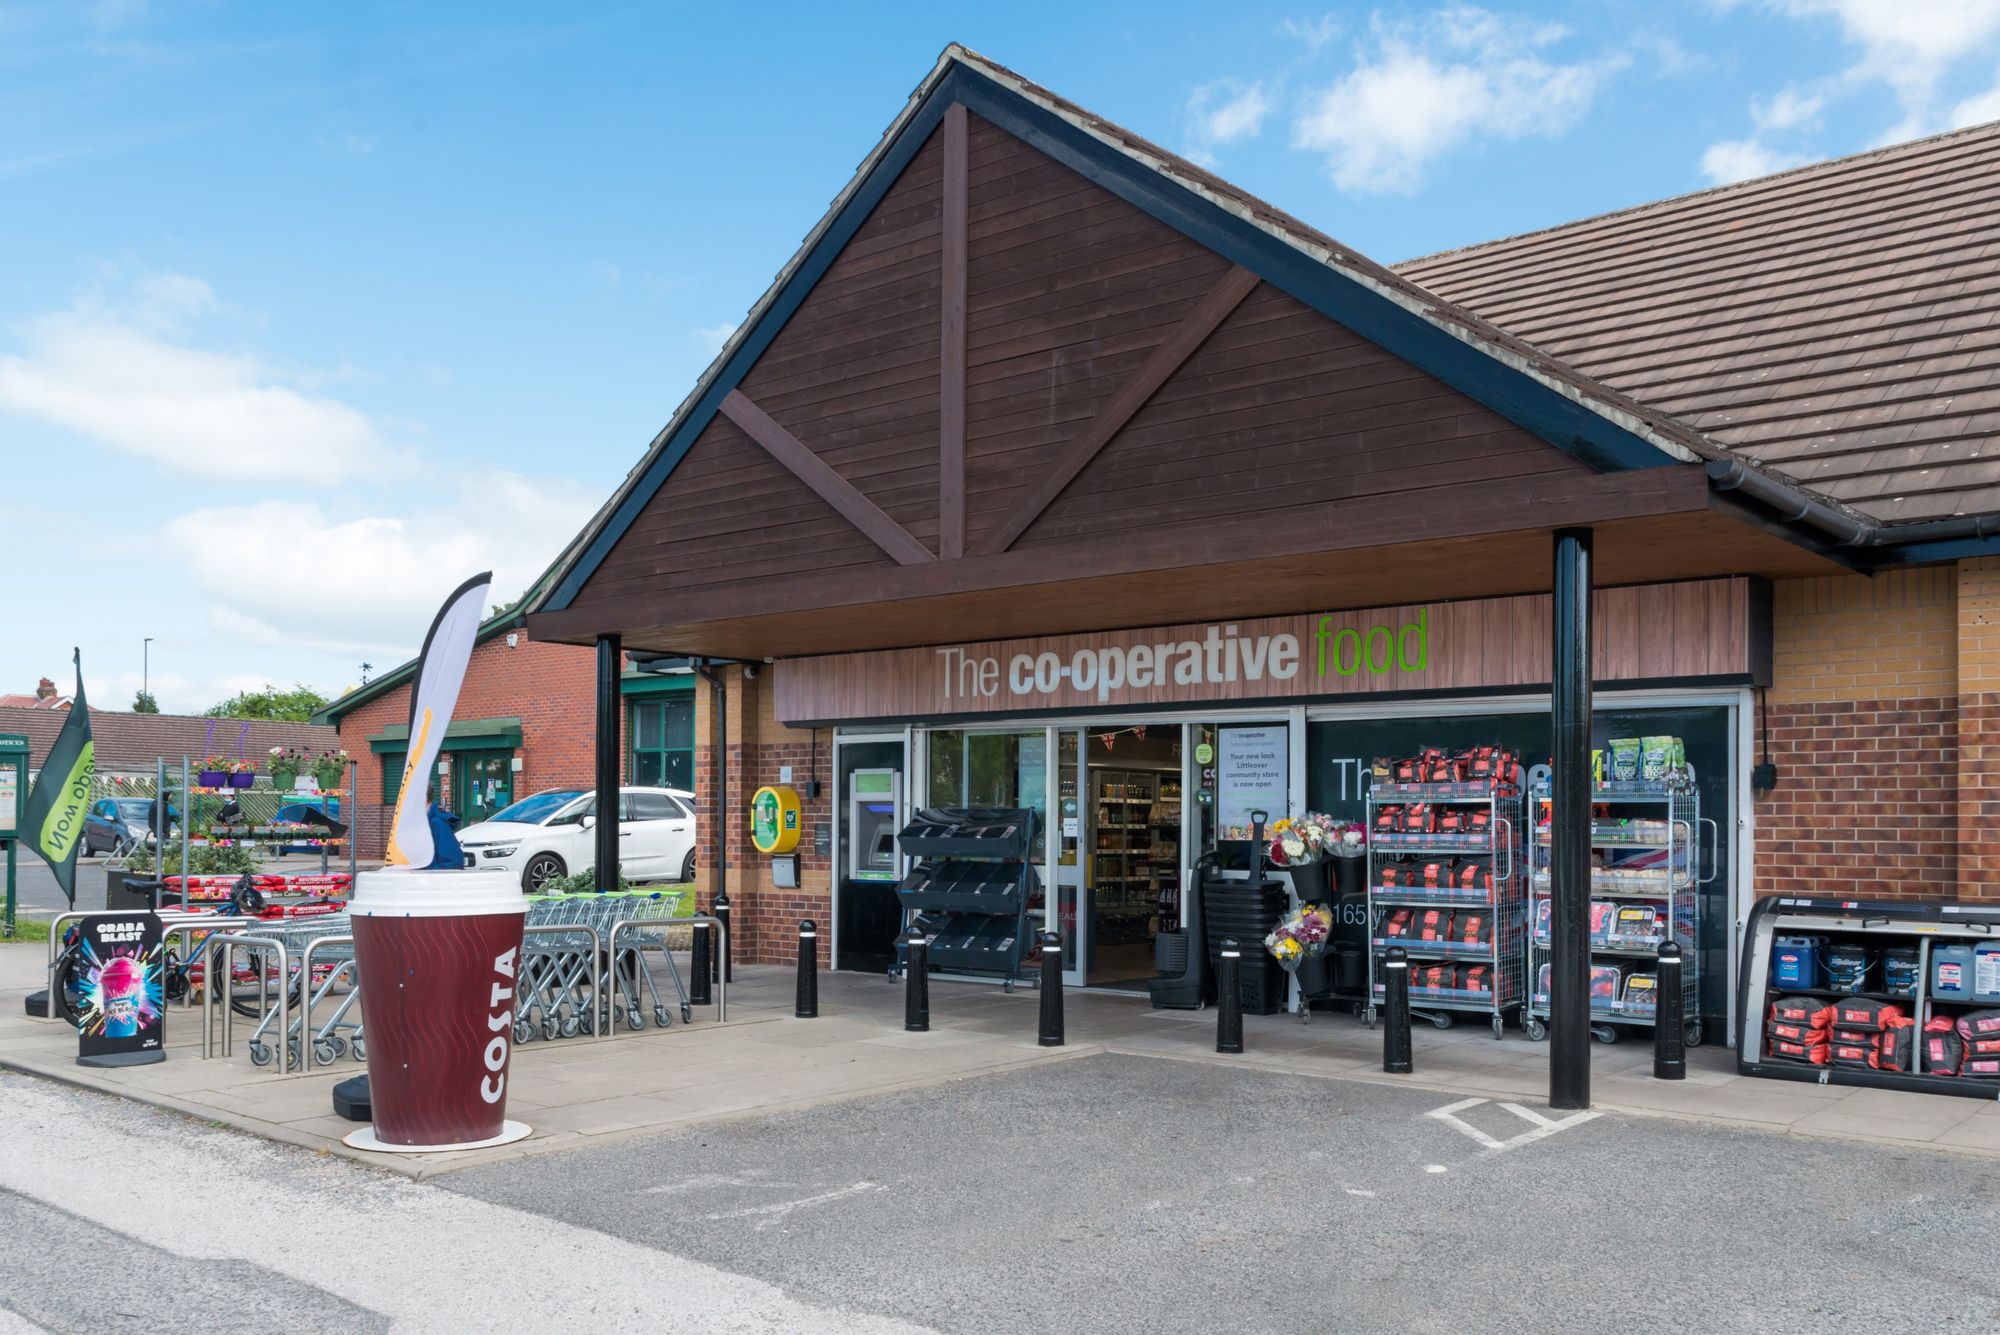 Major investment by Central England Co-op brings a brand new look to Derby food store